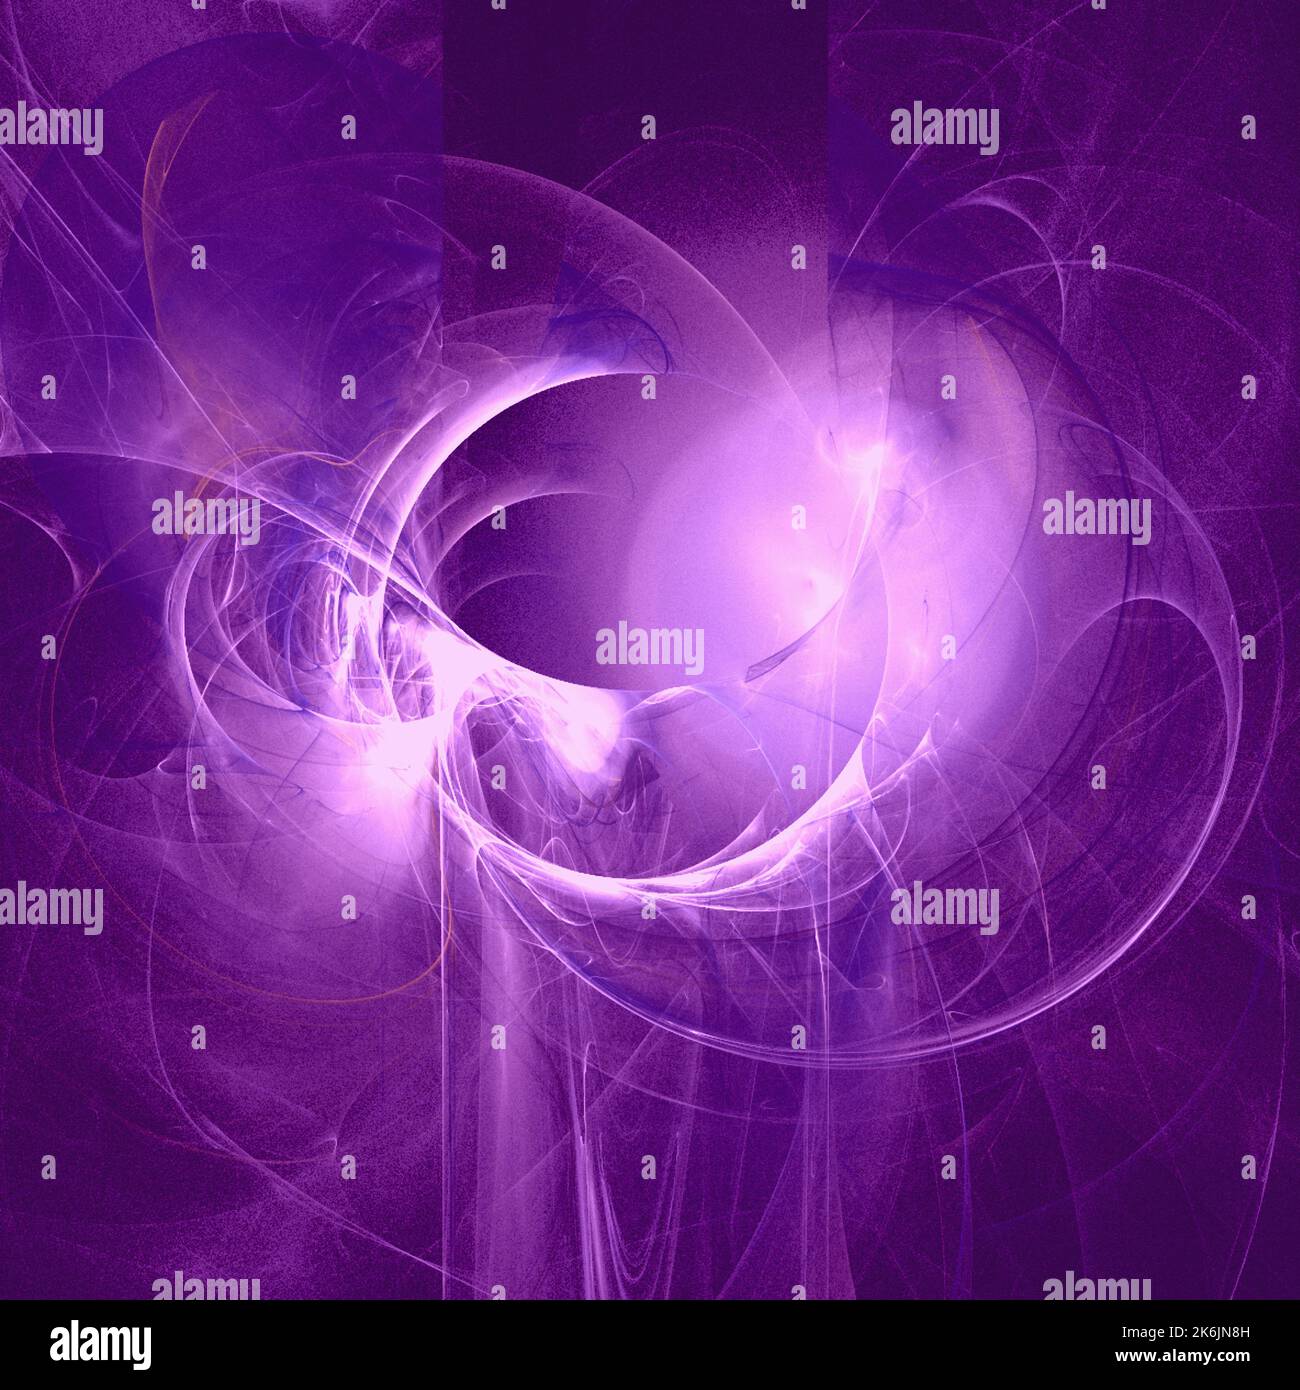 fantasy space illustration of a purple planet in deep space, wallpaper, design Stock Photo